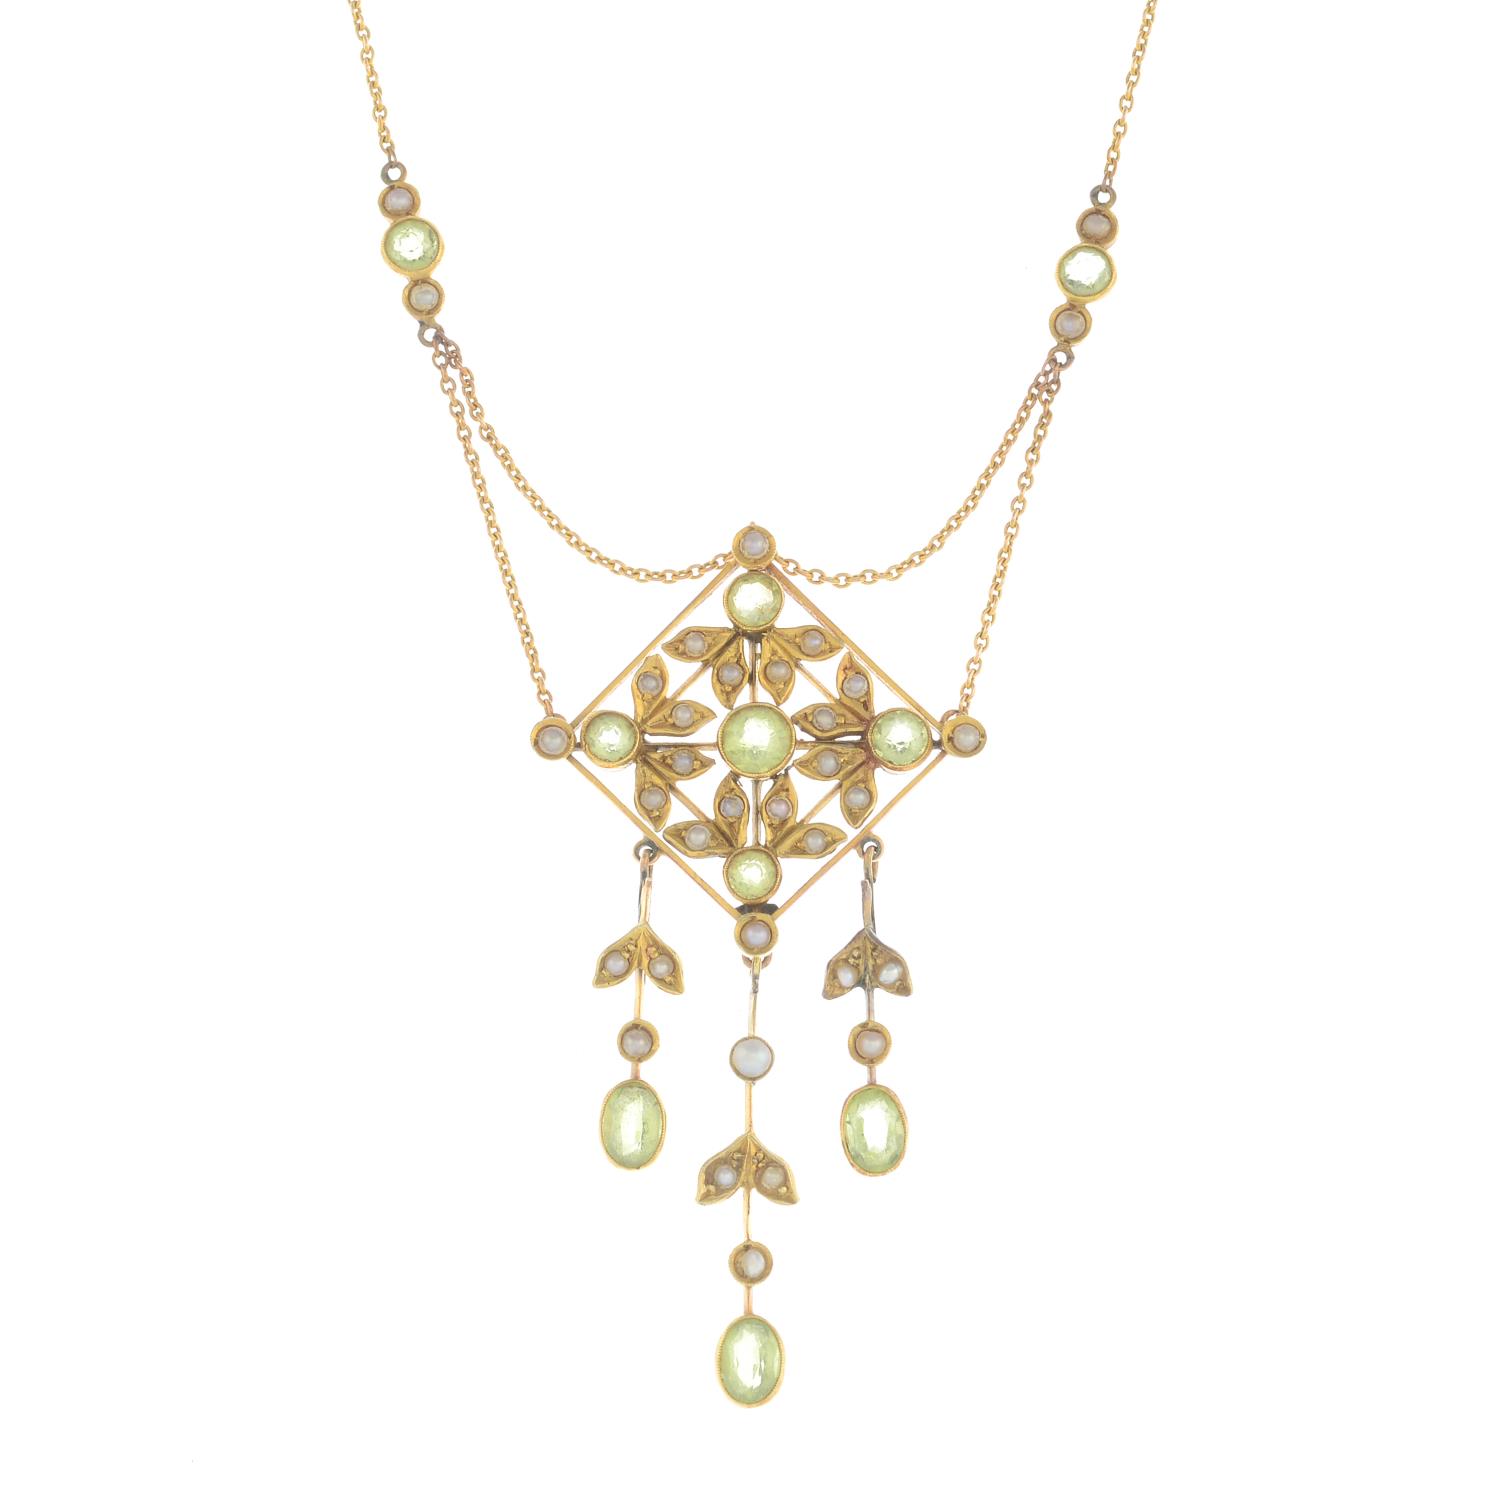 An Edwardian 15ct gold peridot and split pearl necklace.